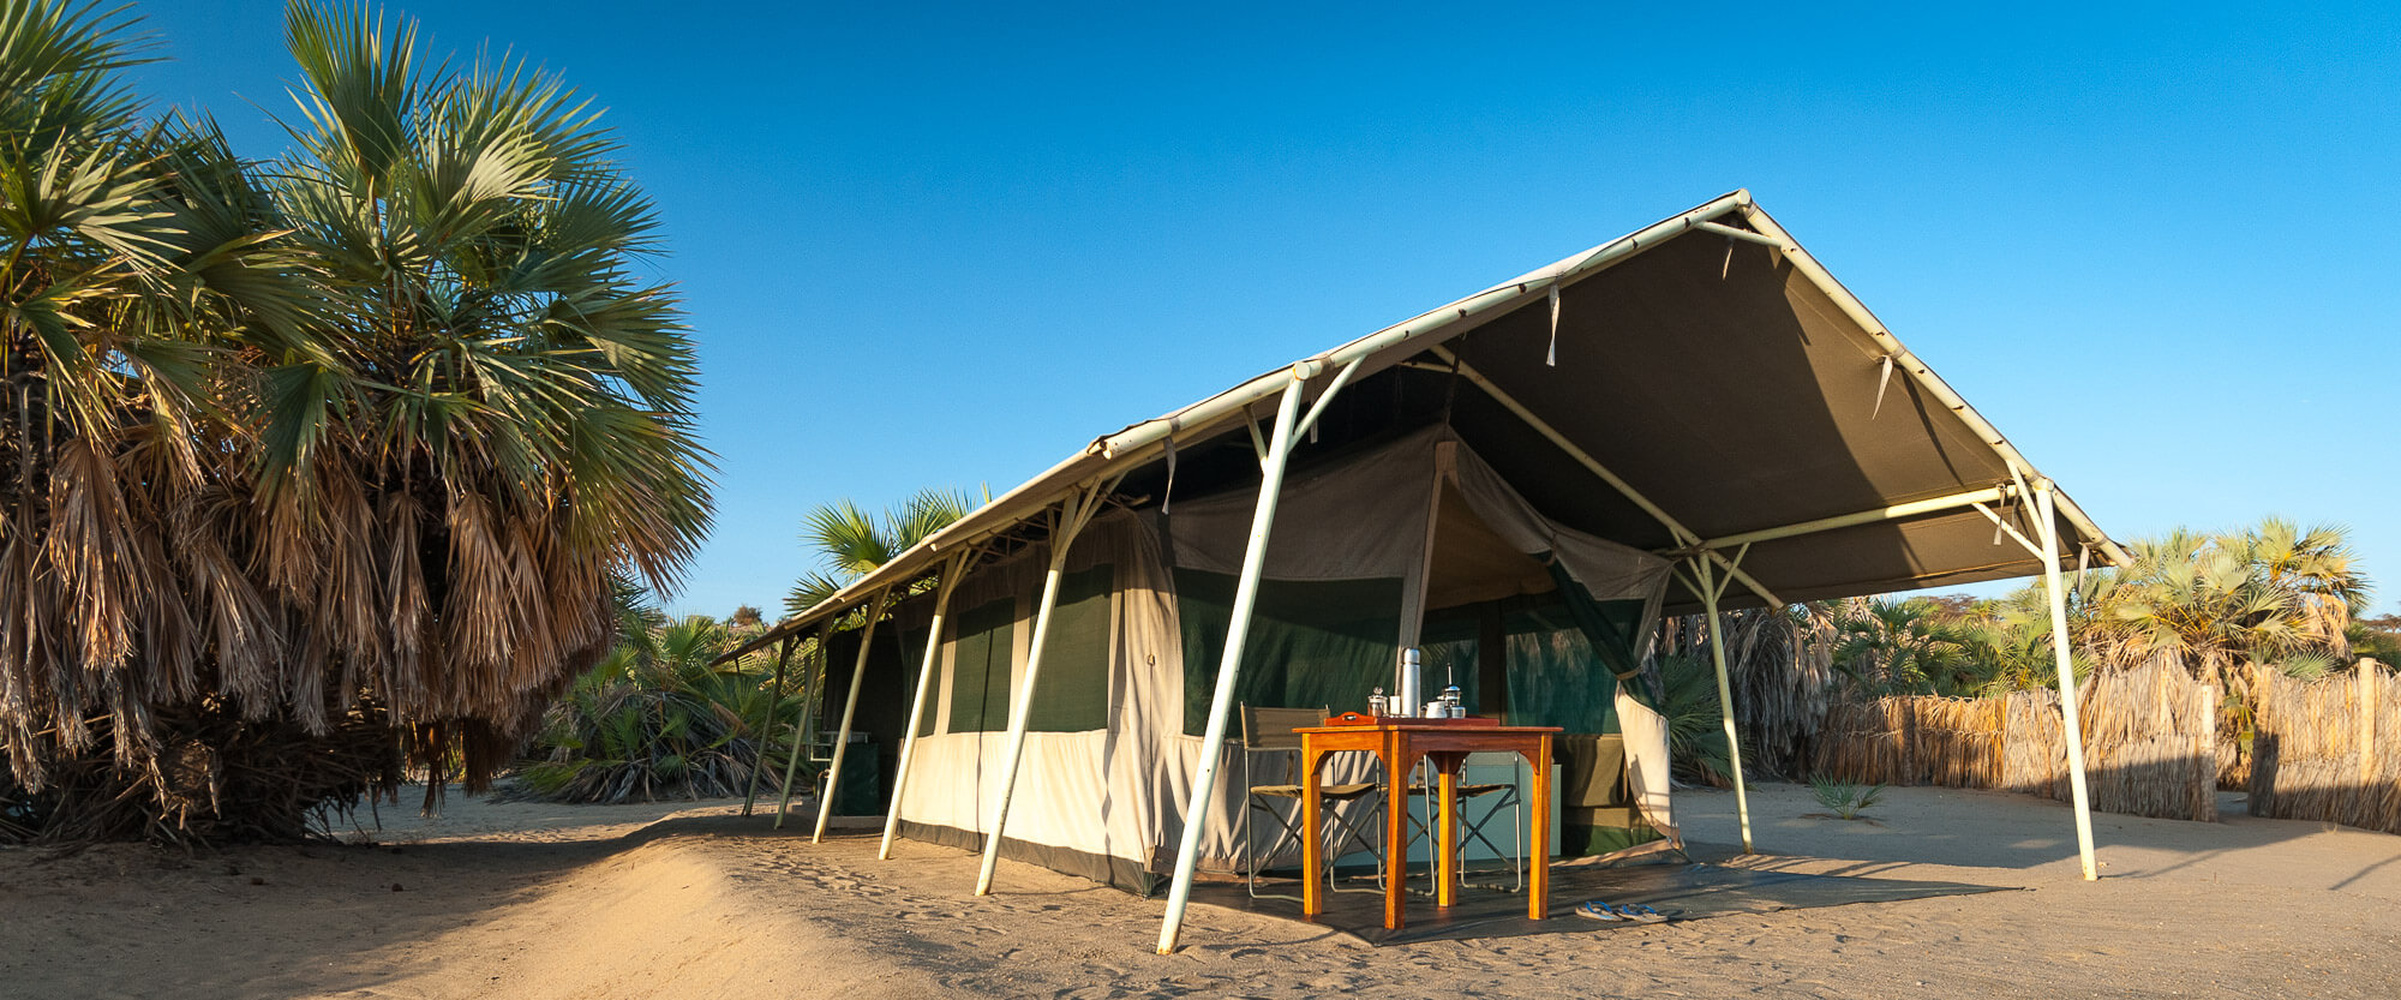 Your Tented Accommodation